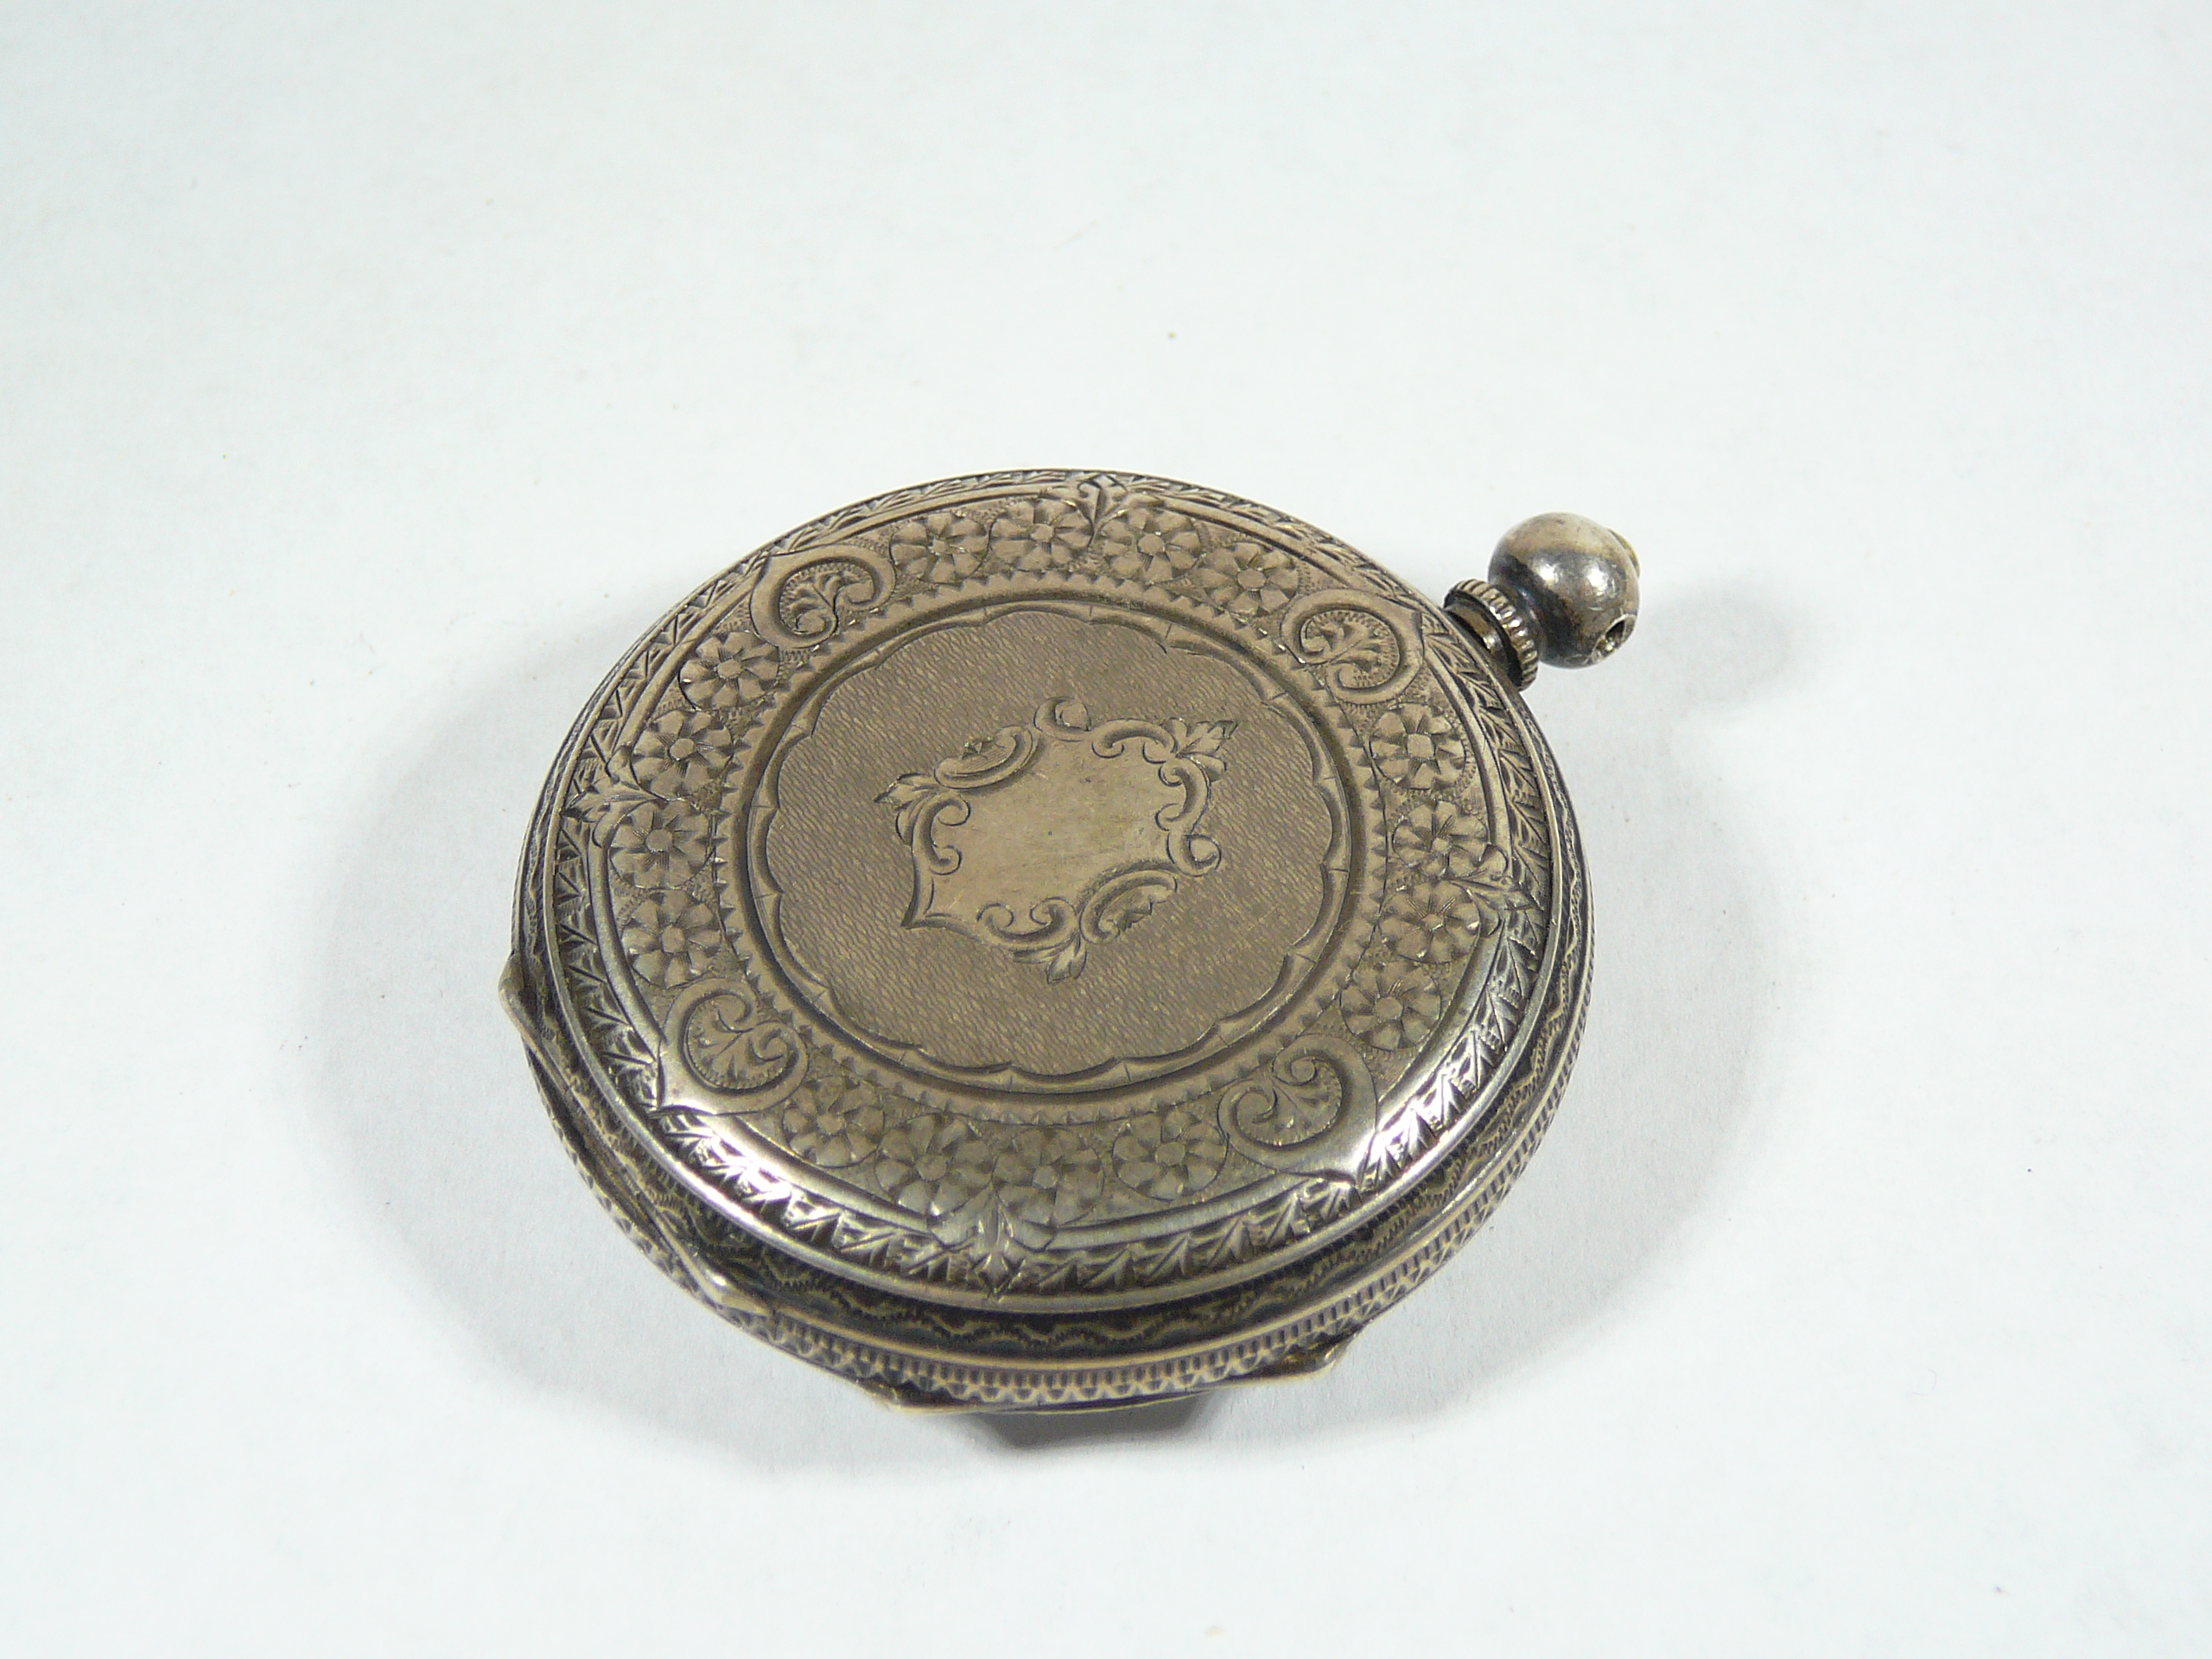 Ladies Antique Silver Fob Watch - Image 4 of 4